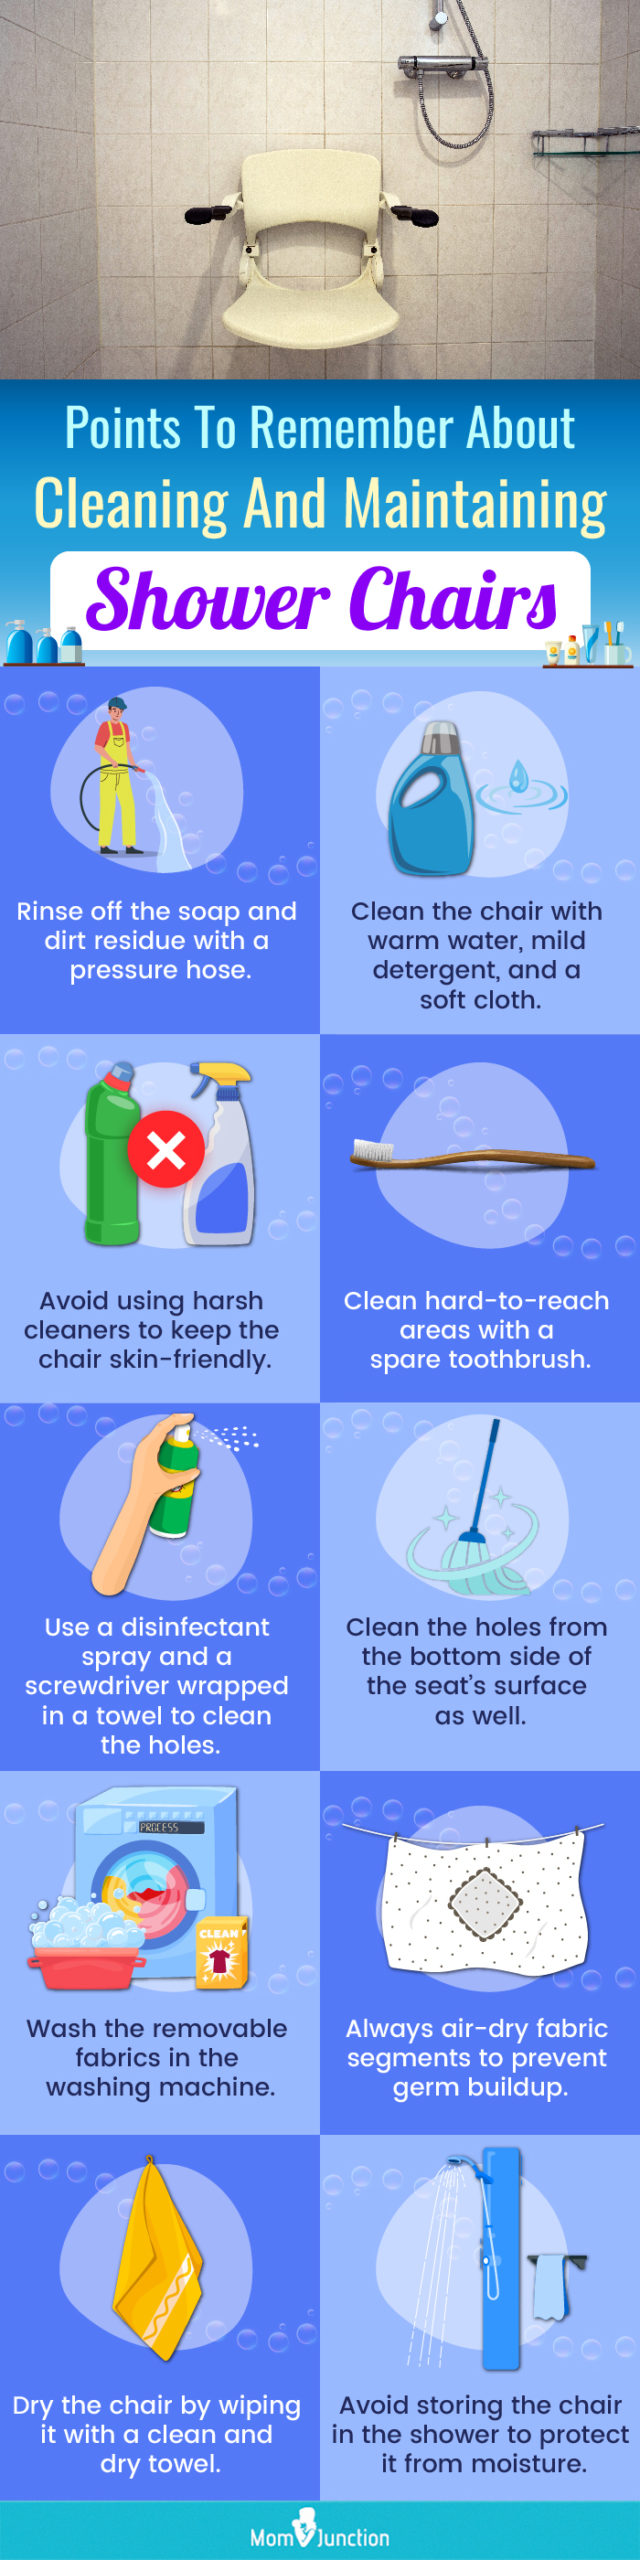 Points To Remember About Cleaning And Maintaining Shower Chairs (infographic)